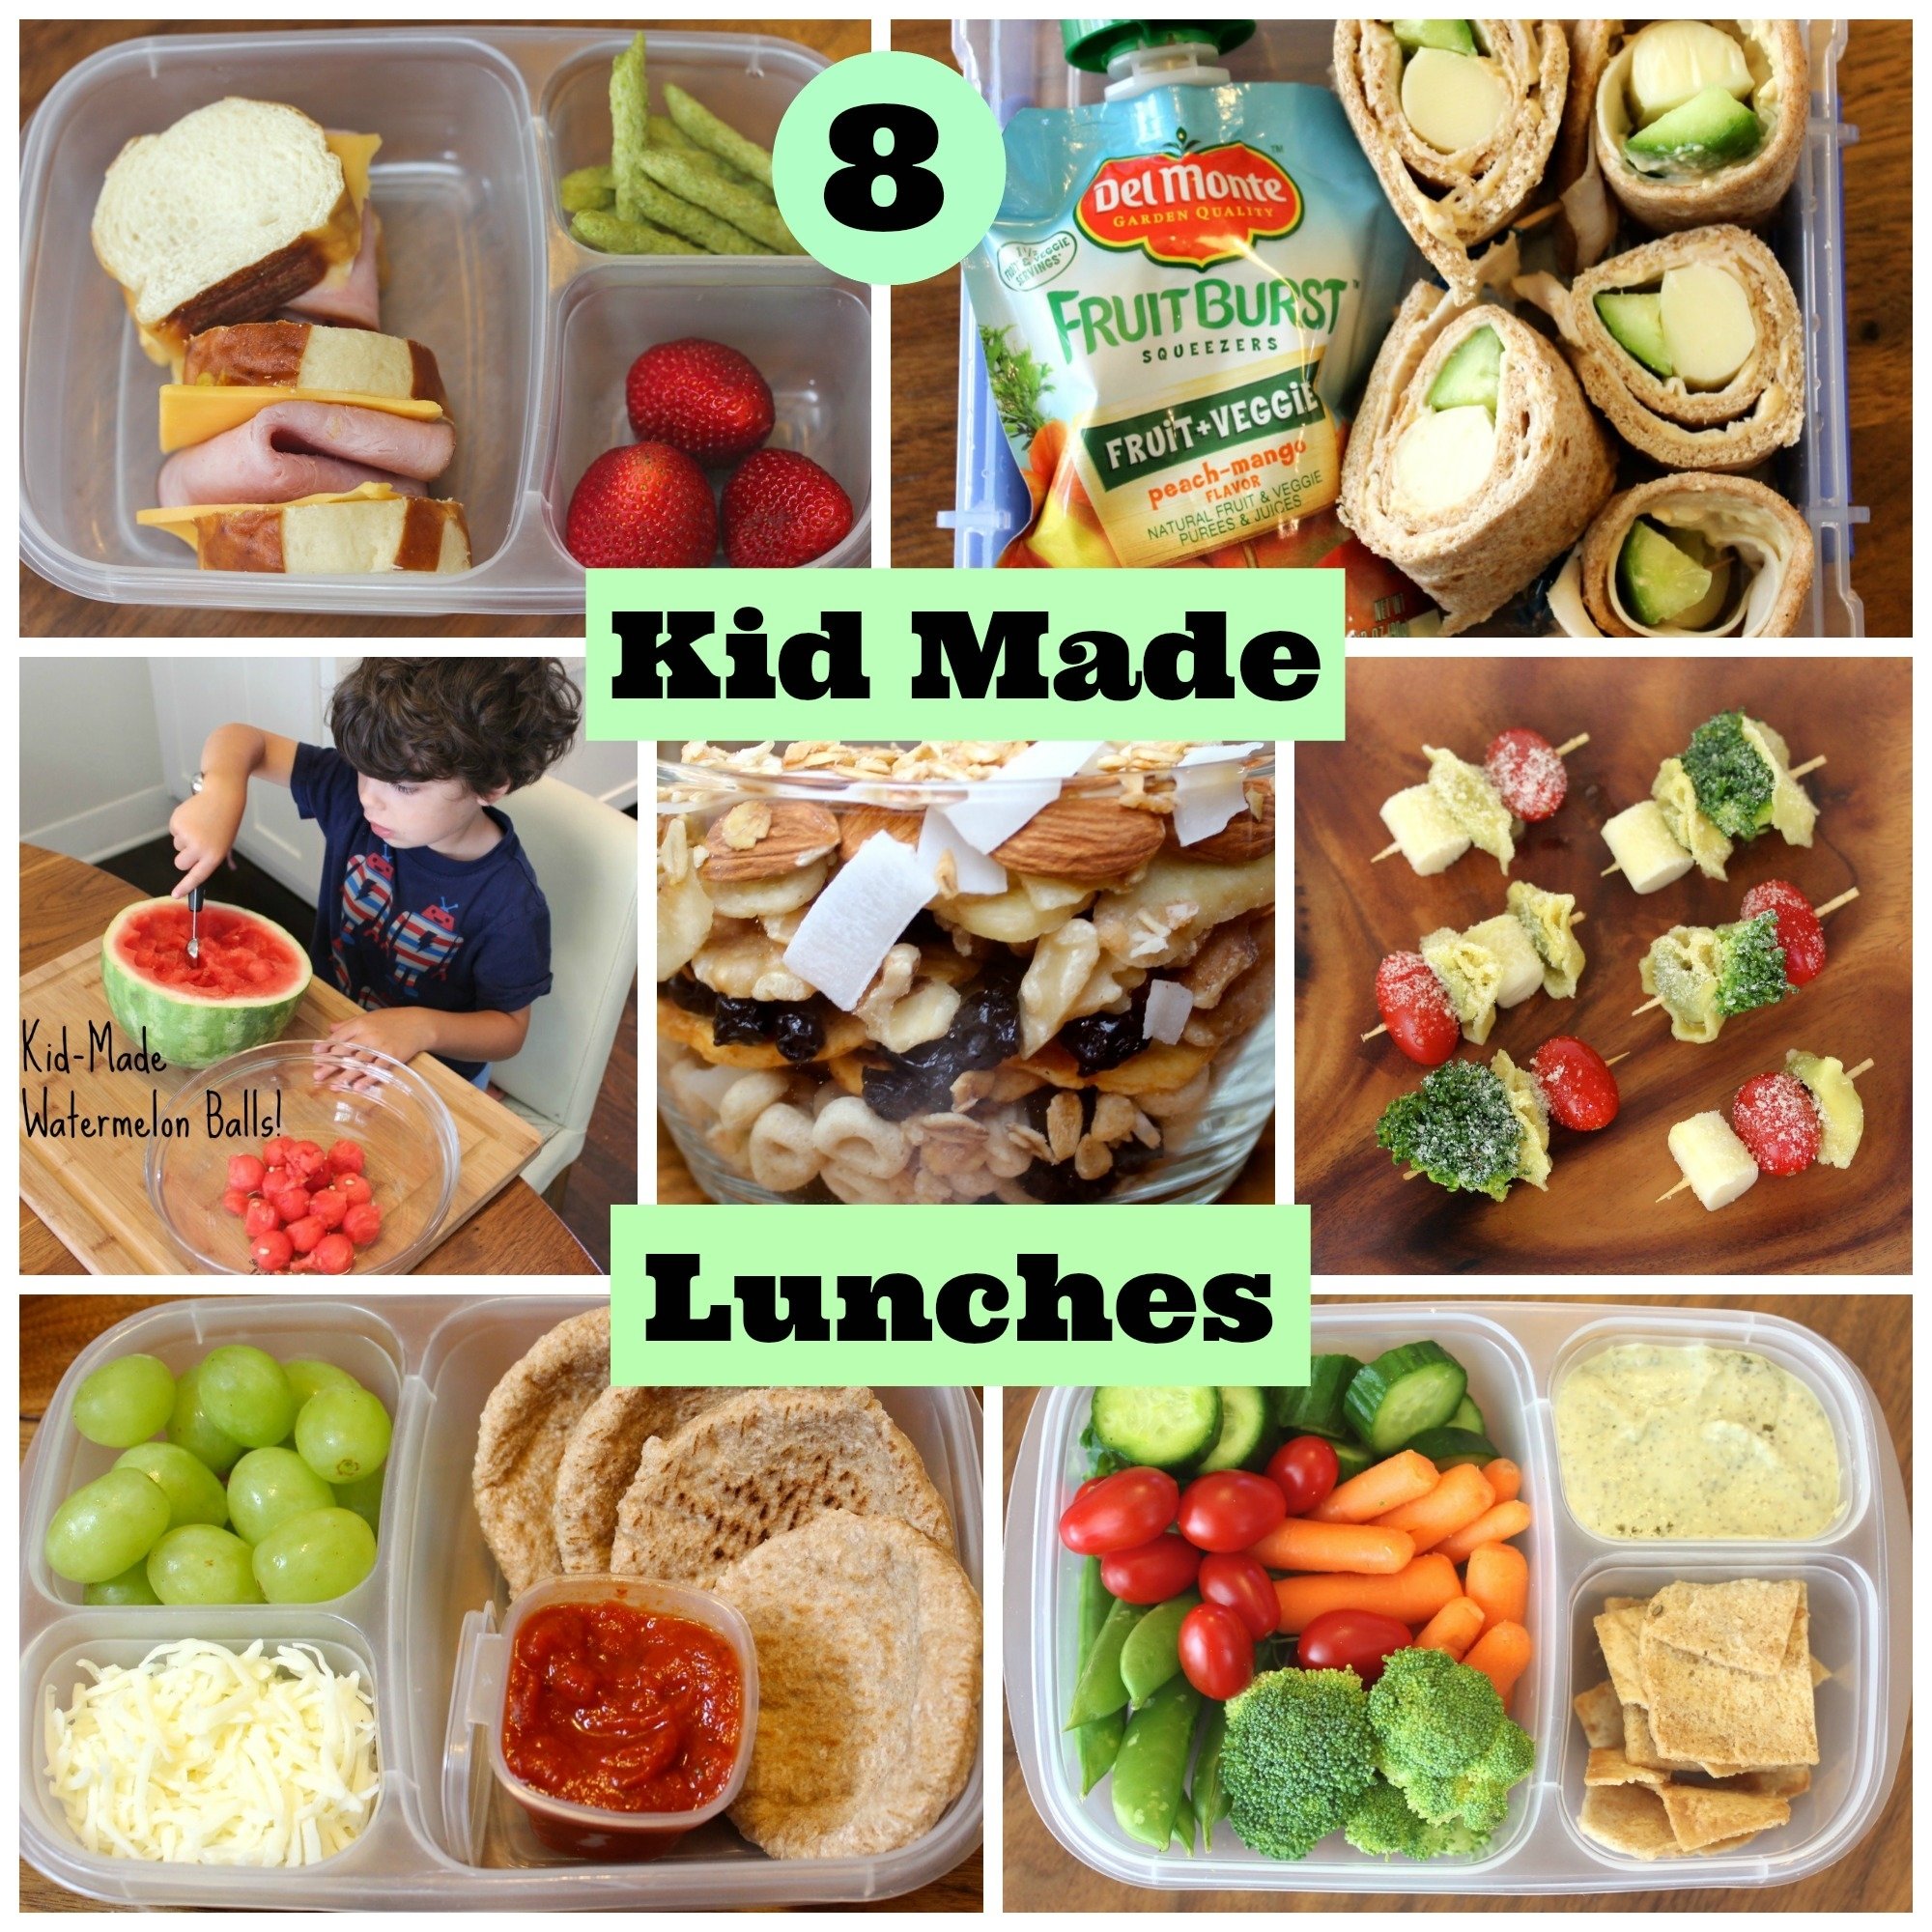 10 Fabulous Lunch Ideas For Kids At School 4 healthy school lunches your kids can make themselves babble 11 2022